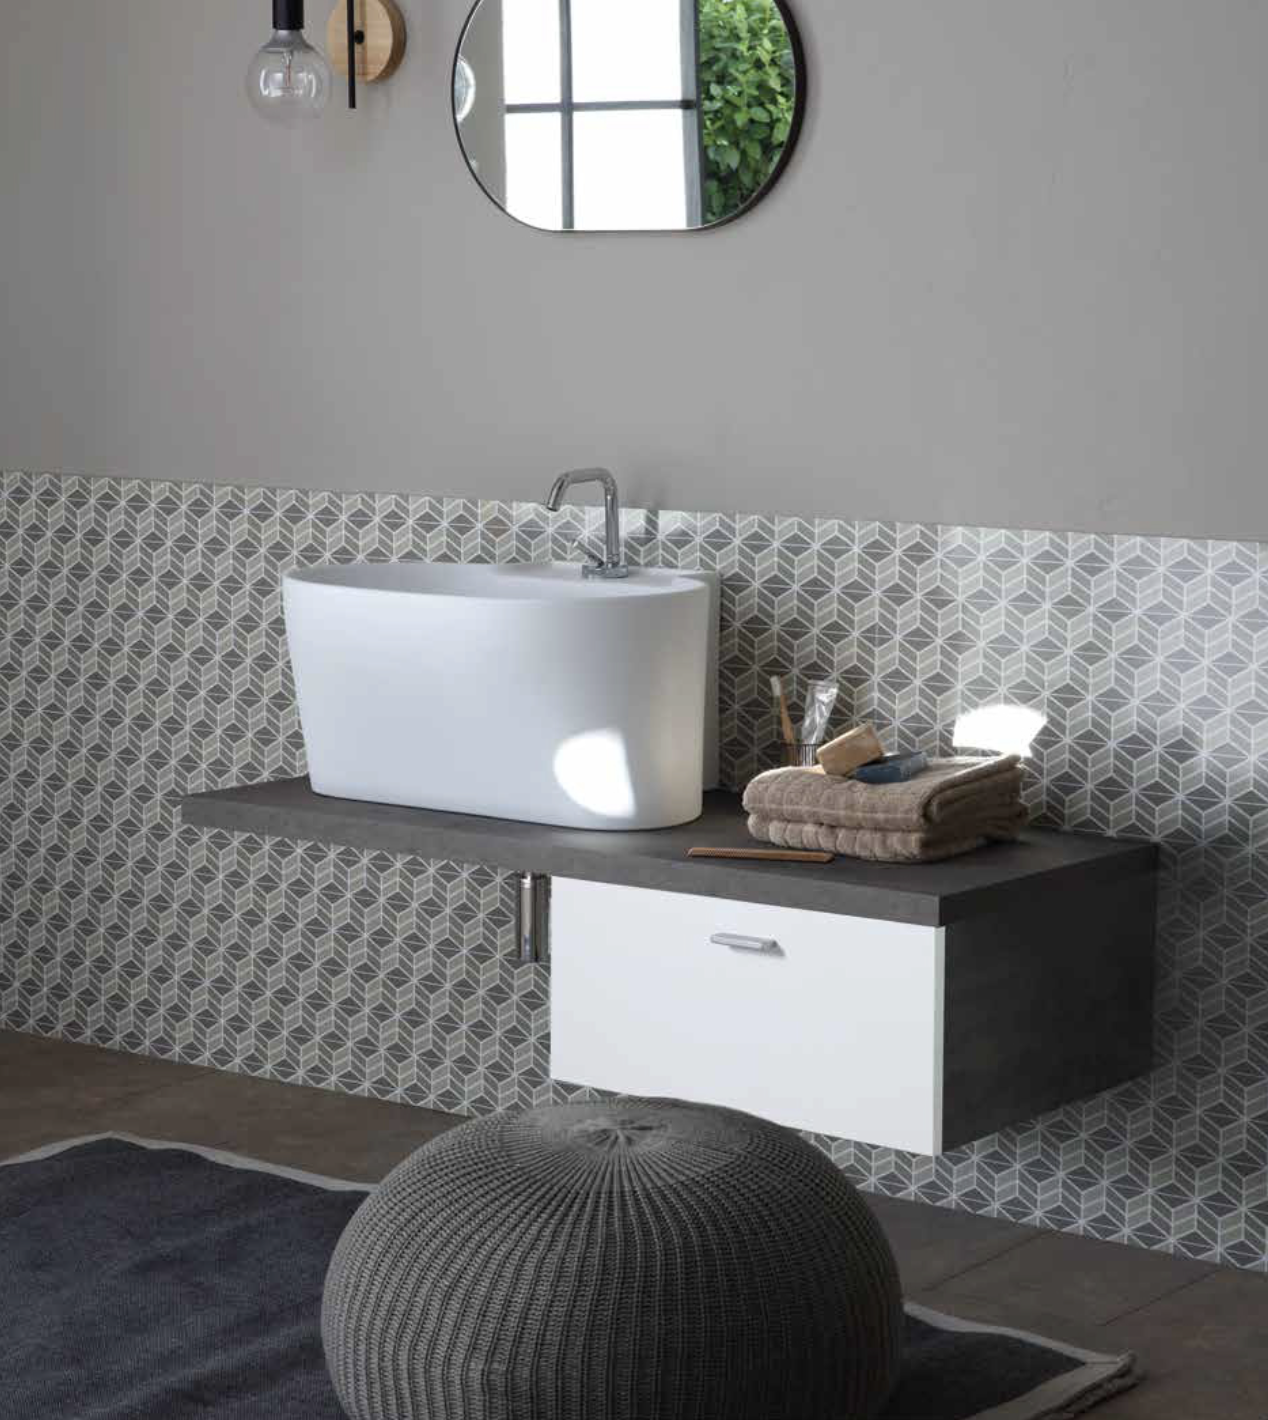 Firmiana bathroom compositions to furnish with taste and functionality.